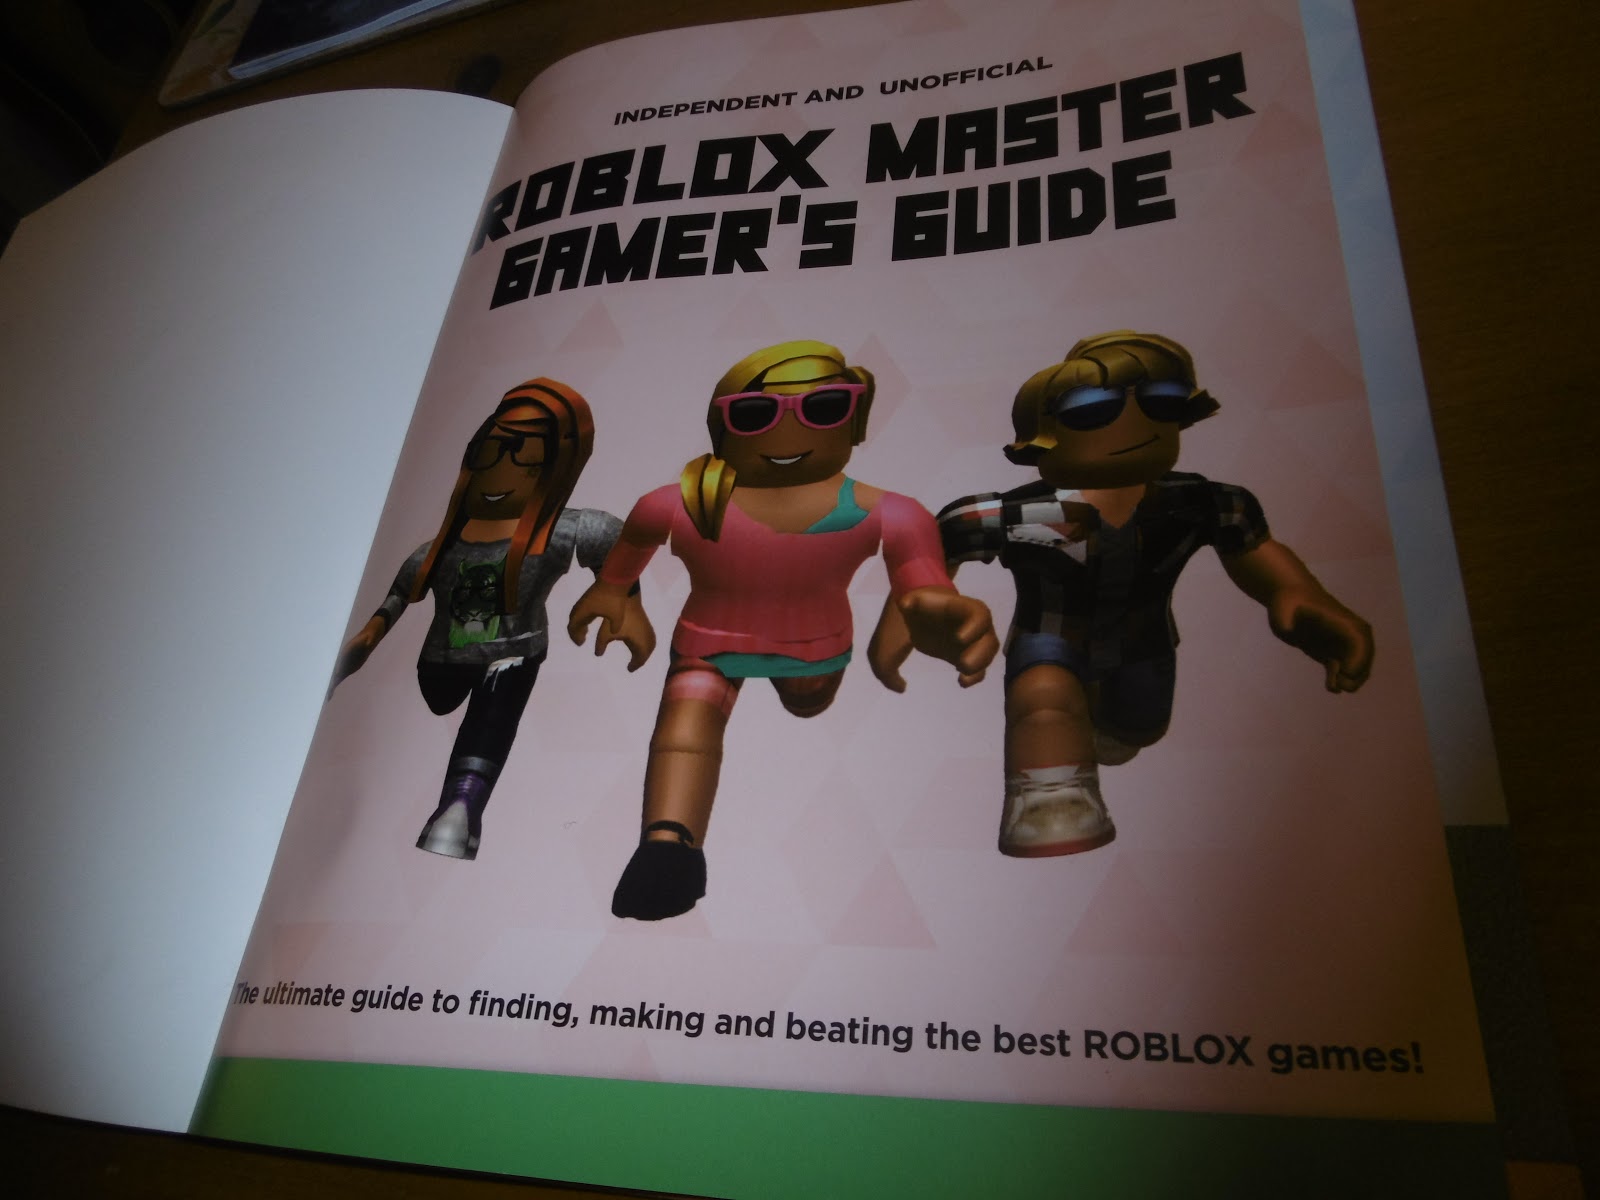 Giveaway 701 Win Roblox Master Gamer S Guide Closing Date 11 11 - the roblox master gamer s guide is the perfect guide for learning the basics of game making in step by step form and it s given pierre loads of new ideas